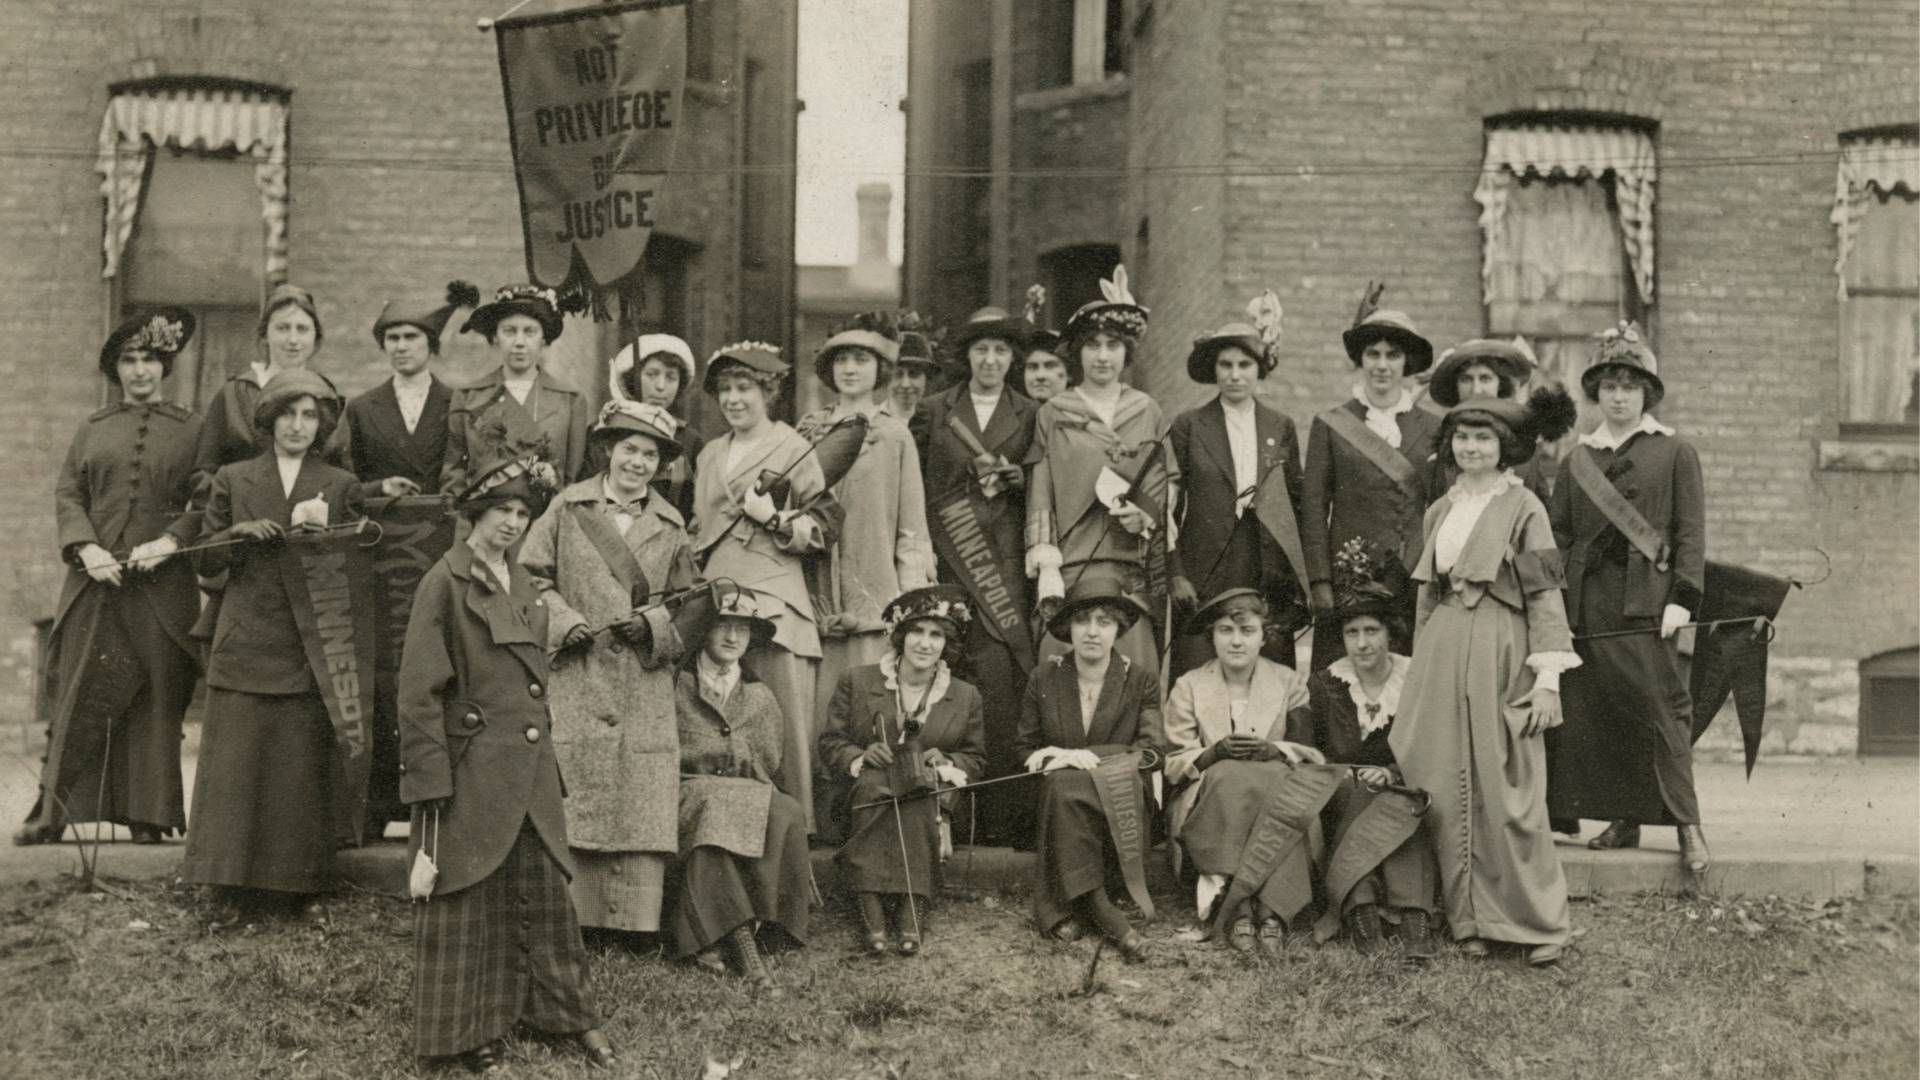 Black and white photo of women gathered in a group holding pennants